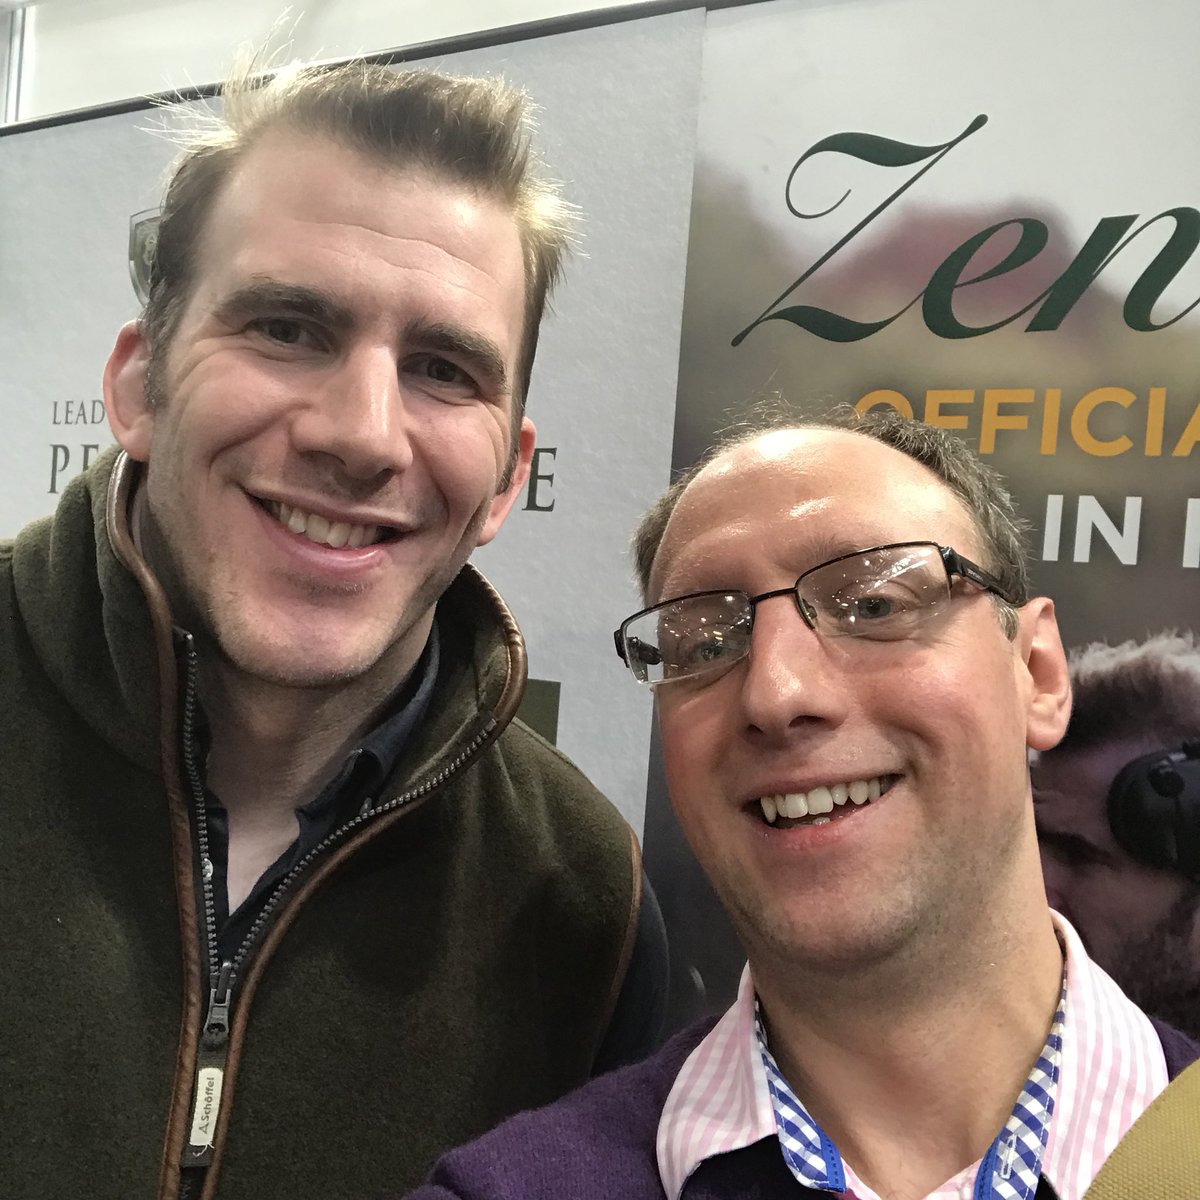 Thanks again to @EleyHawk for the opportunity to meet a rugby legend! #BritishShootingShow